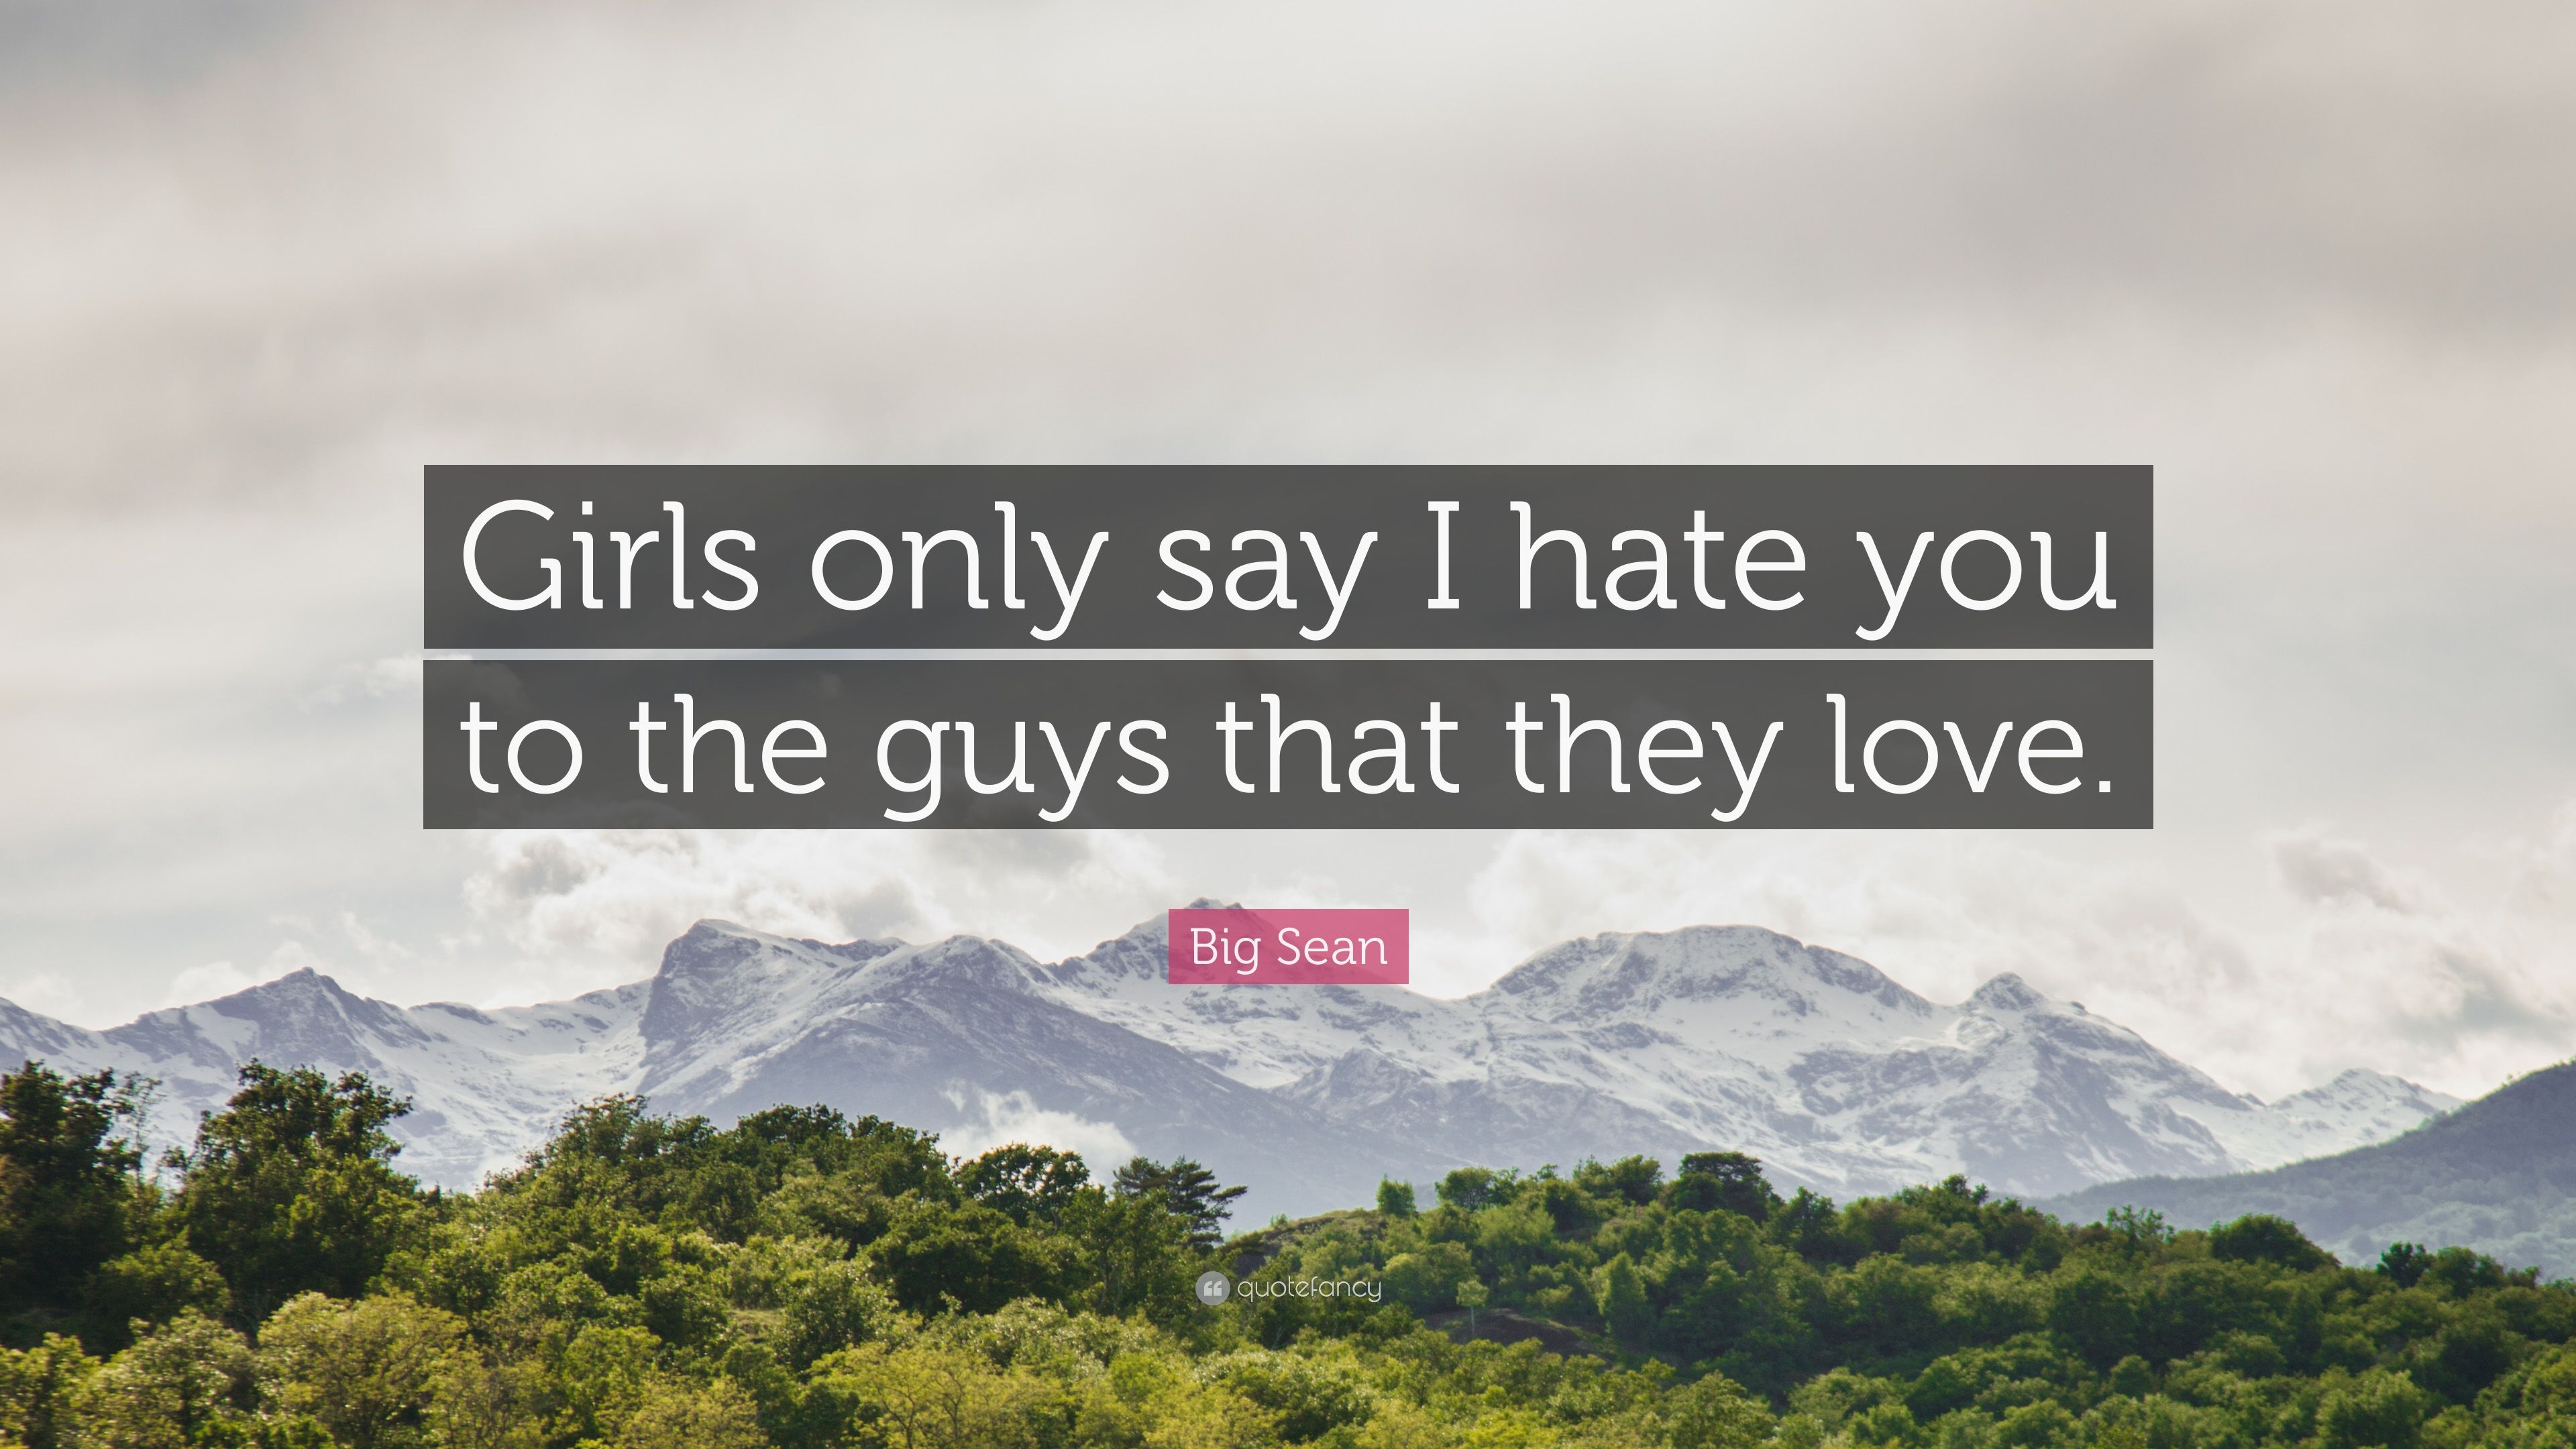 Big Sean Quote: "Girls only say I hate you to the guys that they.